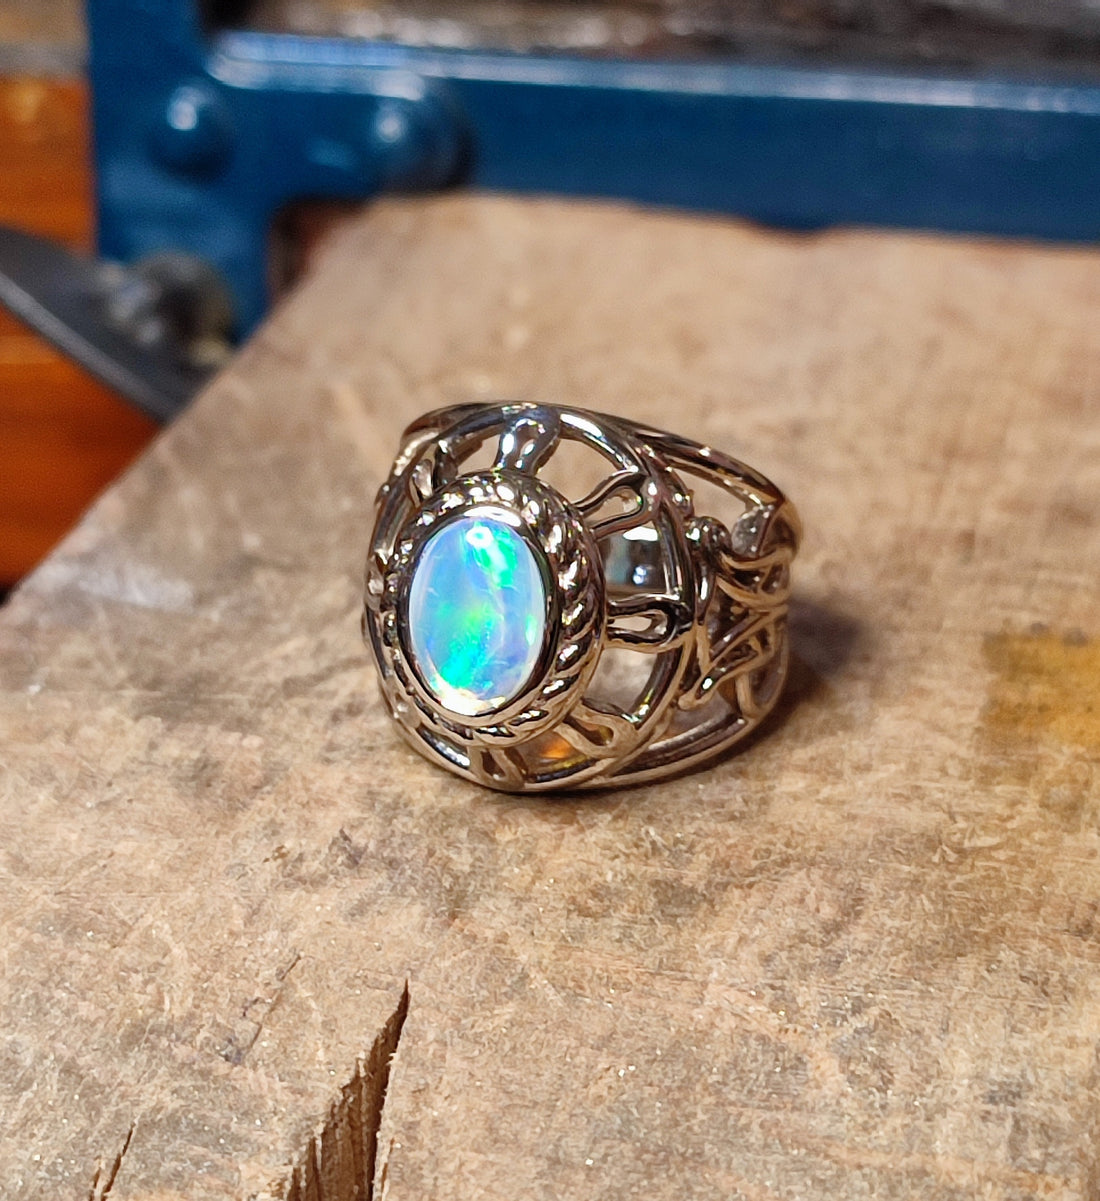 Remodelling 18ct White Gold into an Opal Ring